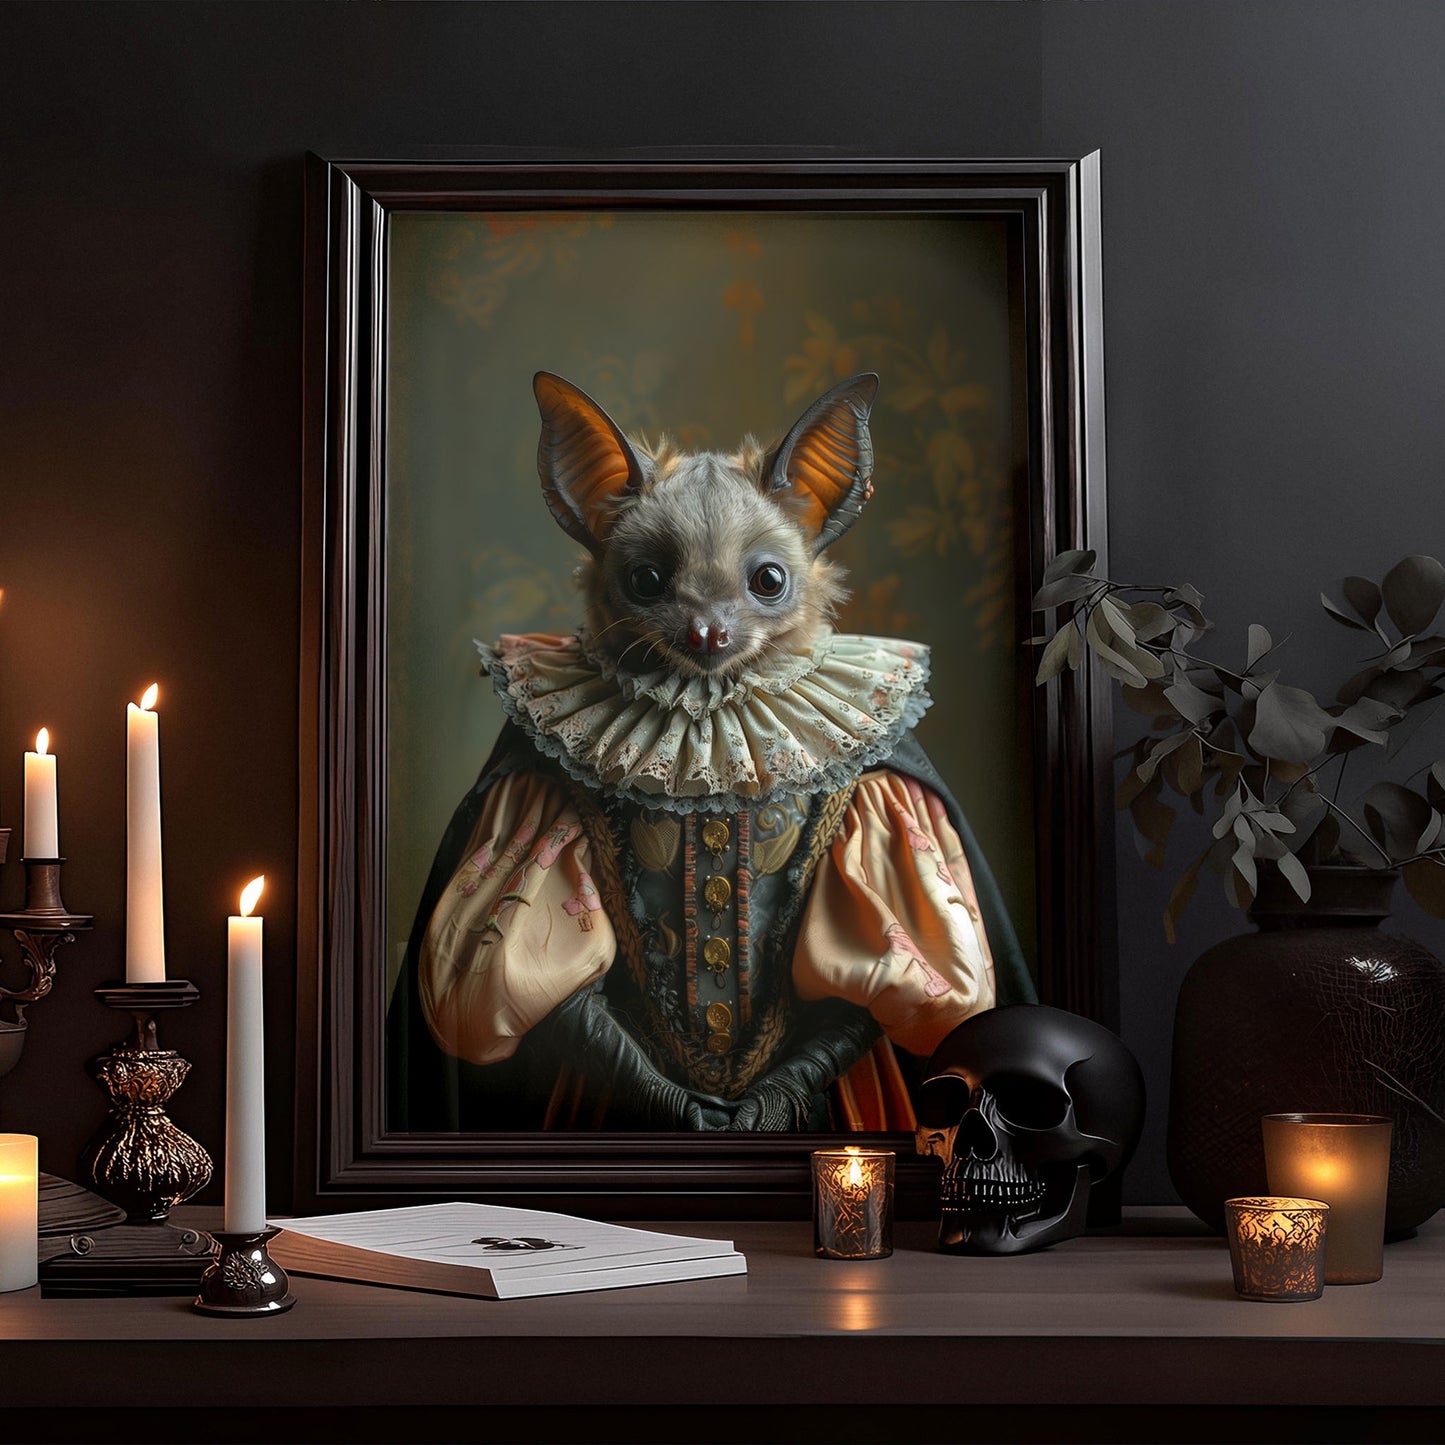 Dark Aesthetic Wall Art - Gothic Bat in Dress Poster for a Unique Look